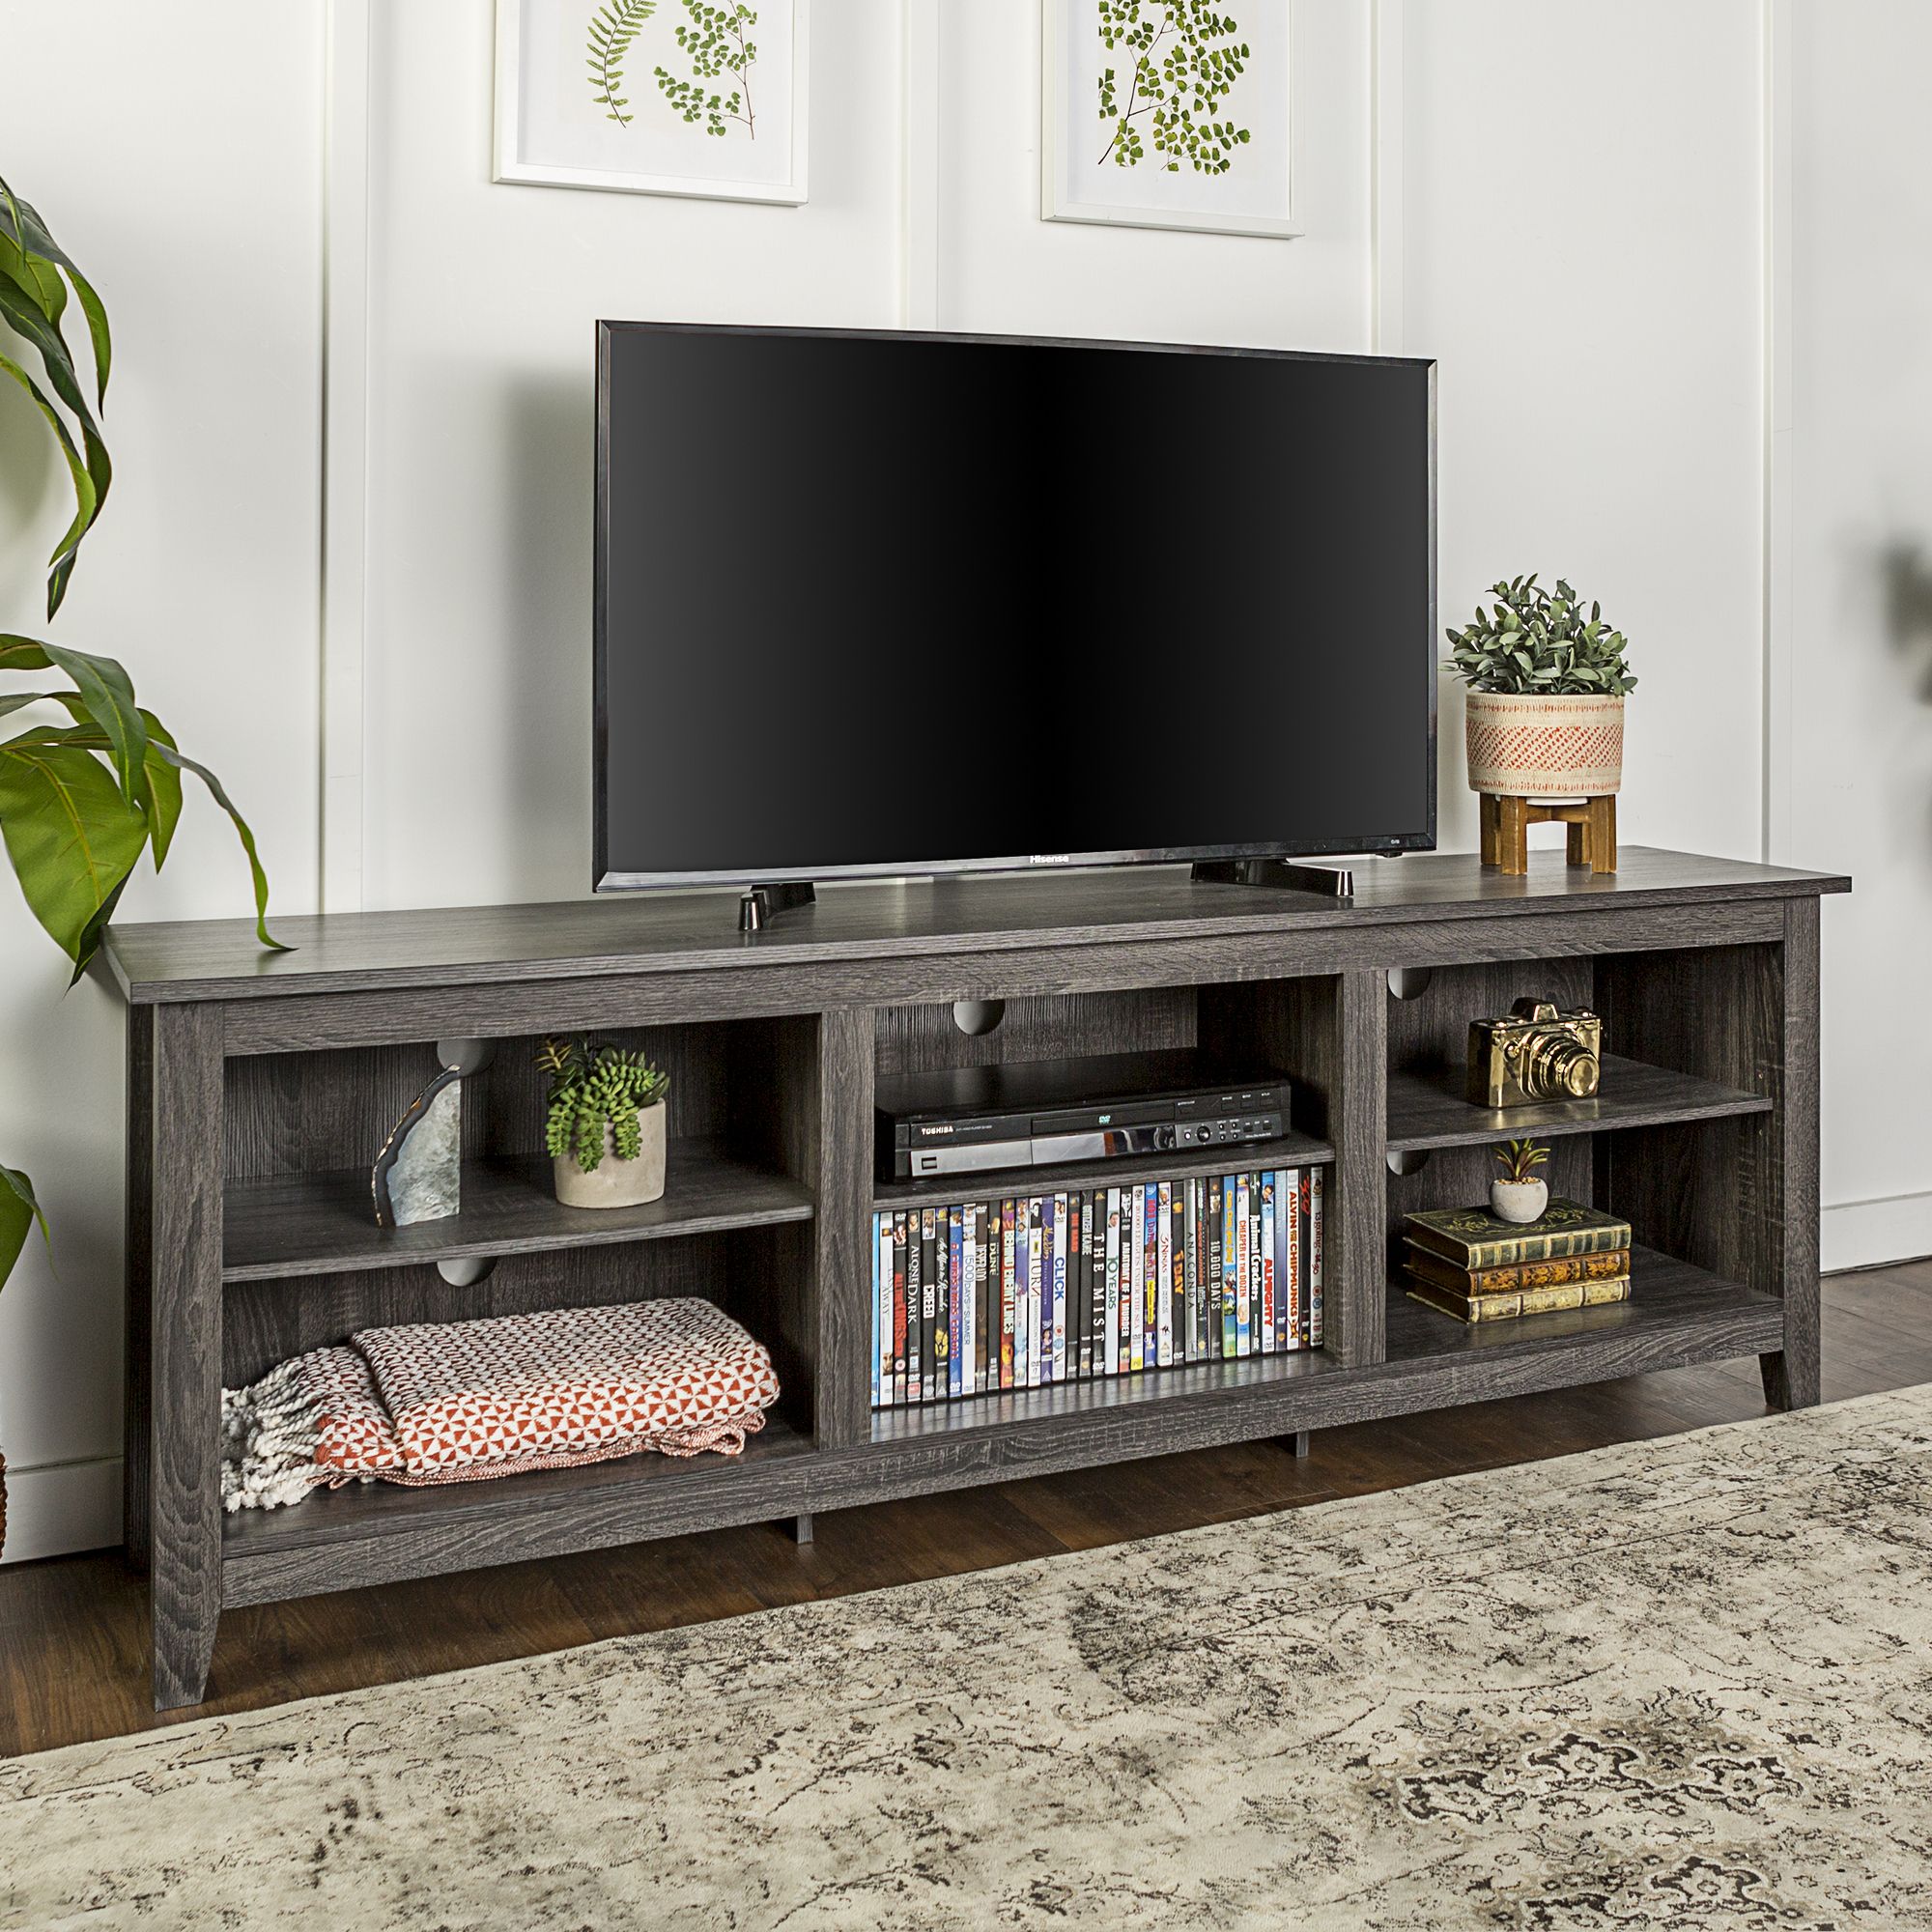 70" Wood Media Tv Stand Storage Console – Charcoal In Tv Stands With Table Storage Cabinet In Rustic Gray Wash (Photo 1 of 15)